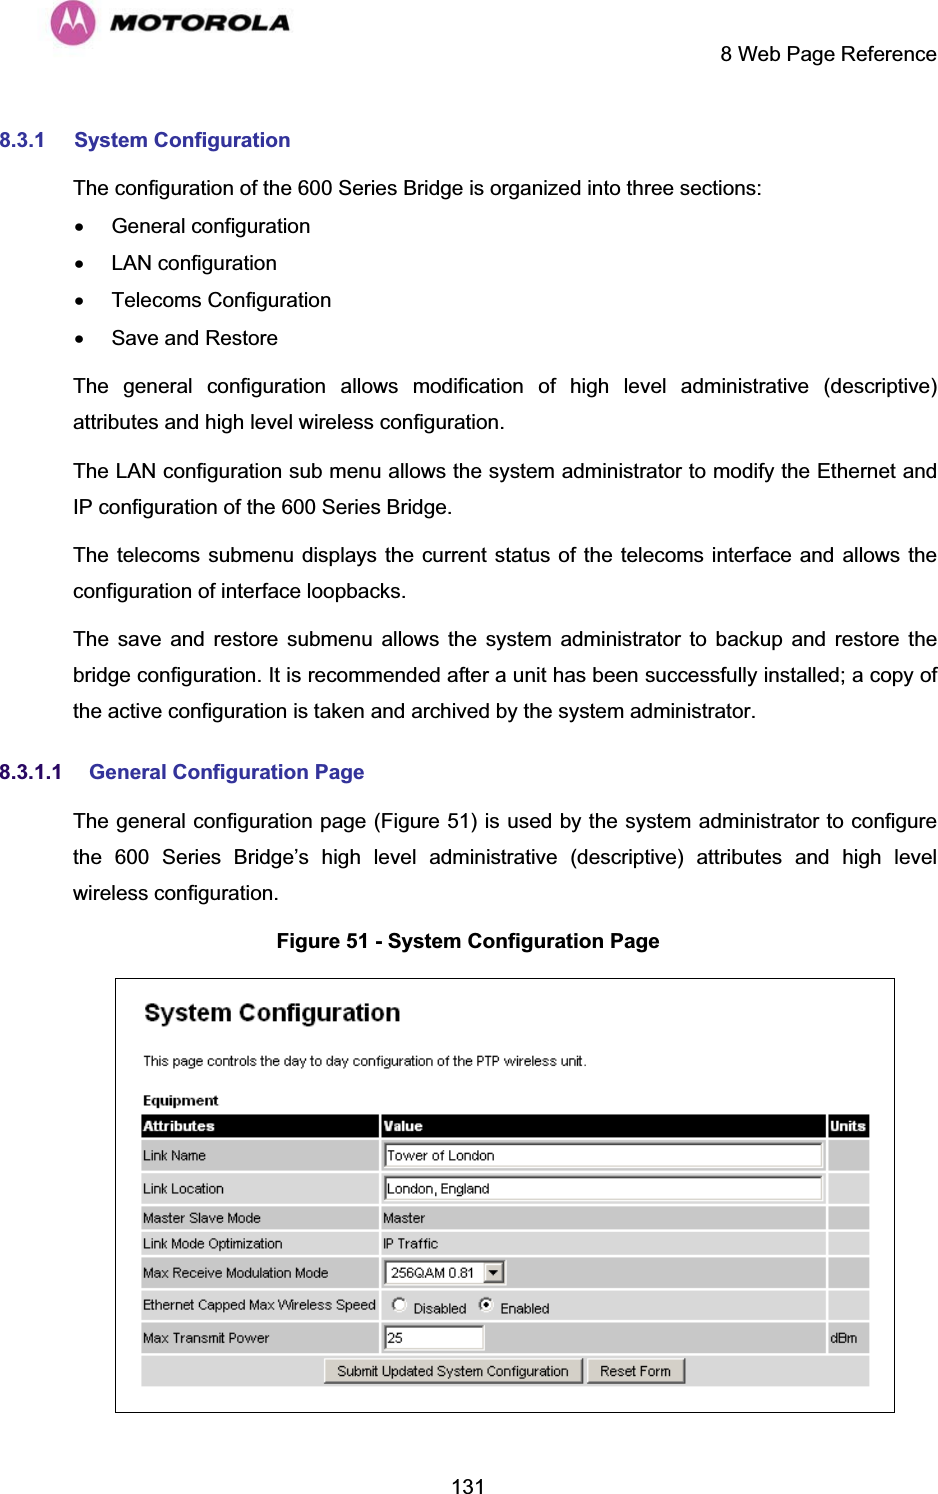     8 Web Page Reference  1318.3.1 System Configuration The configuration of the 600 Series Bridge is organized into three sections: x General configuration x LAN configuration x Telecoms Configuration x  Save and Restore The general configuration allows modification of high level administrative (descriptive) attributes and high level wireless configuration. The LAN configuration sub menu allows the system administrator to modify the Ethernet and IP configuration of the 600 Series Bridge.  The telecoms submenu displays the current status of the telecoms interface and allows the configuration of interface loopbacks. The save and restore submenu allows the system administrator to backup and restore the bridge configuration. It is recommended after a unit has been successfully installed; a copy of the active configuration is taken and archived by the system administrator. 8.3.1.1 General Configuration Page The general configuration page (Figure 51) is used by the system administrator to configure the 600 Series Bridge’s high level administrative (descriptive) attributes and high level wireless configuration. Figure 51 - System Configuration Page  